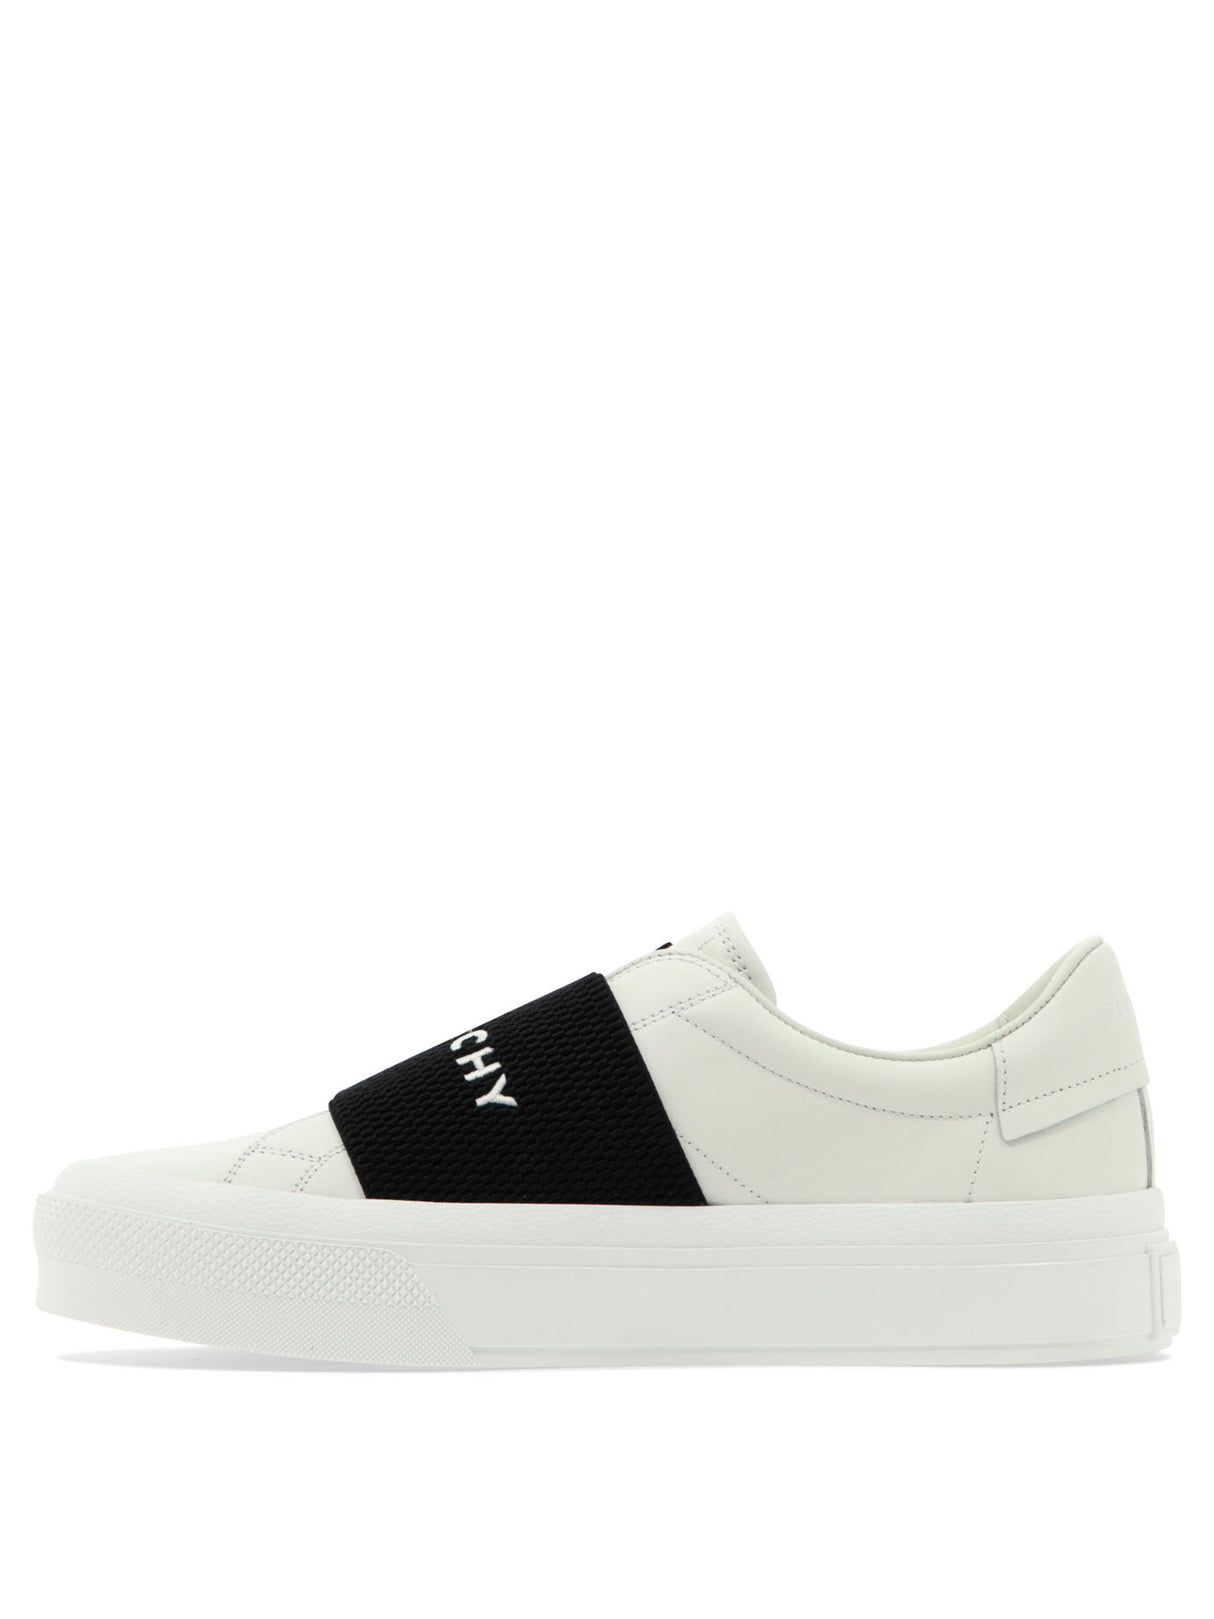 GIVENCHY "CITY SPORT" Sneaker